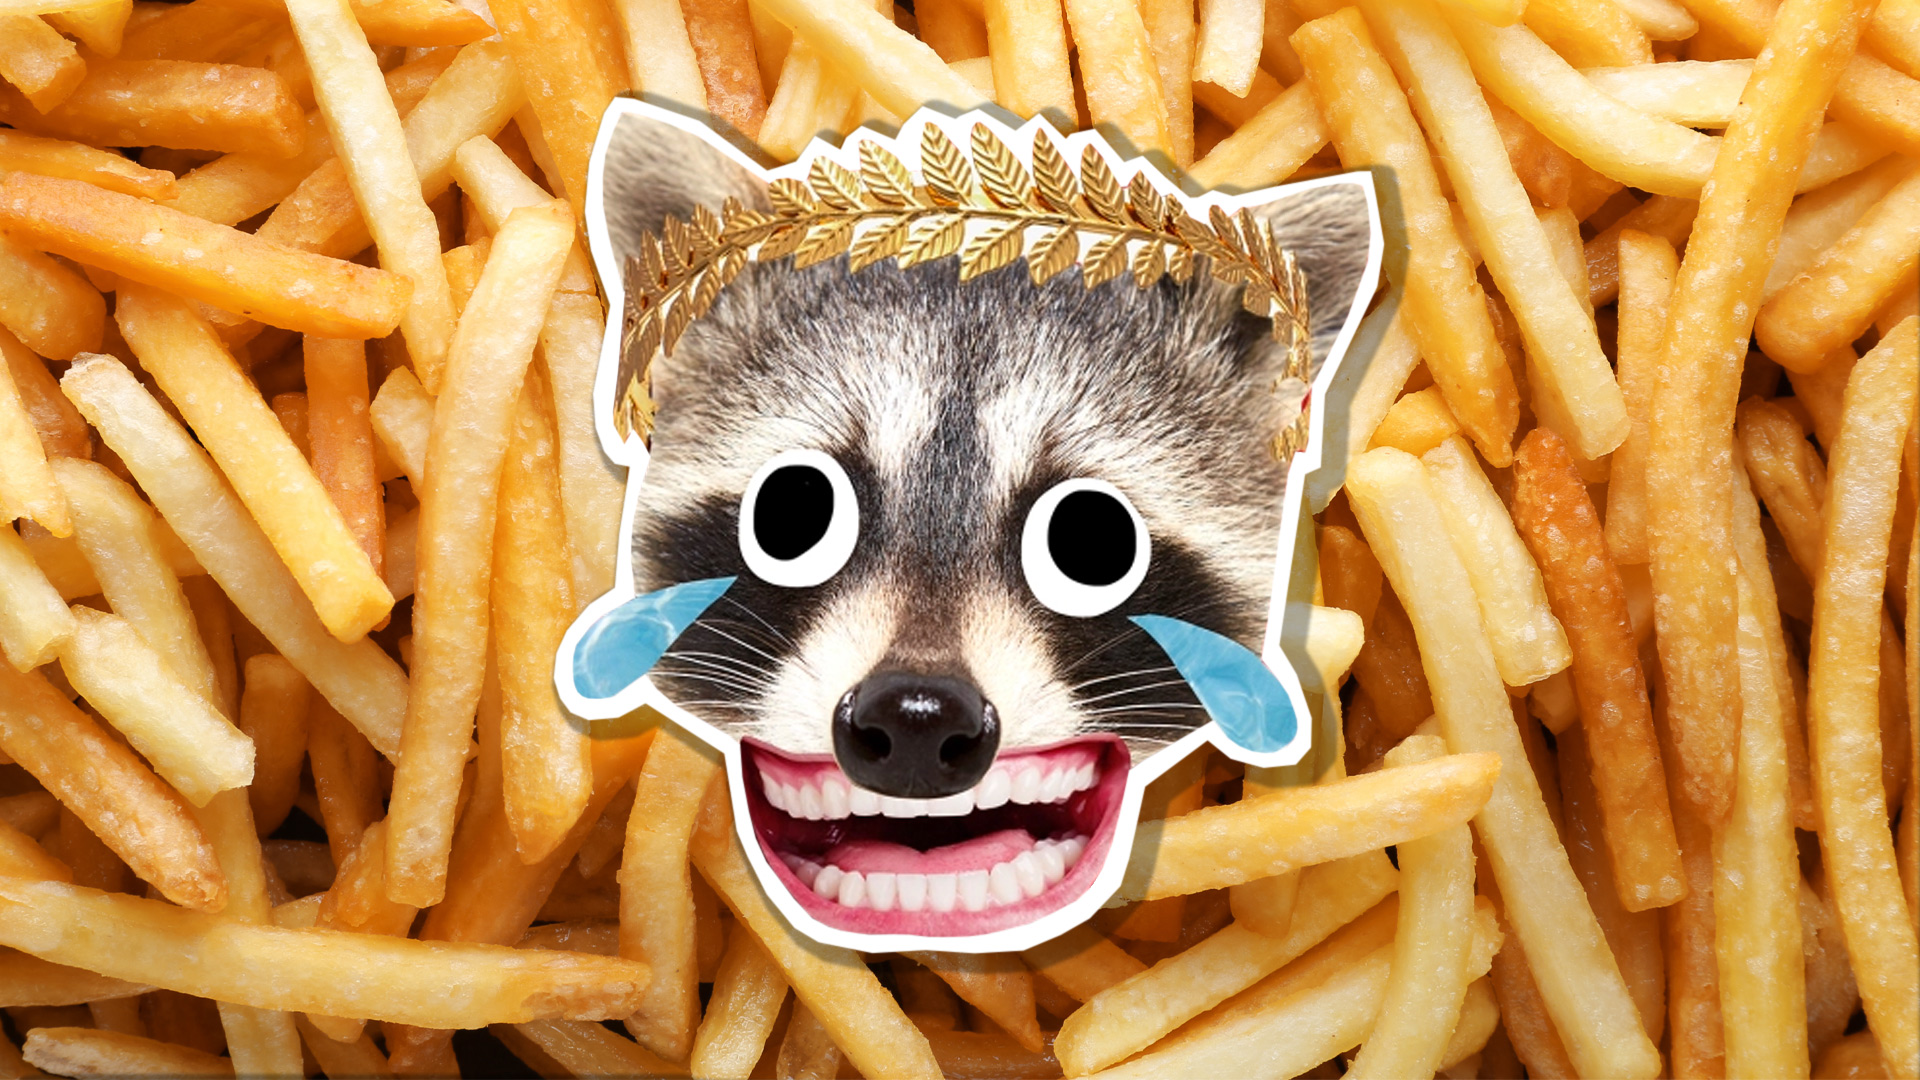 An emperor racoon and a pile of chips